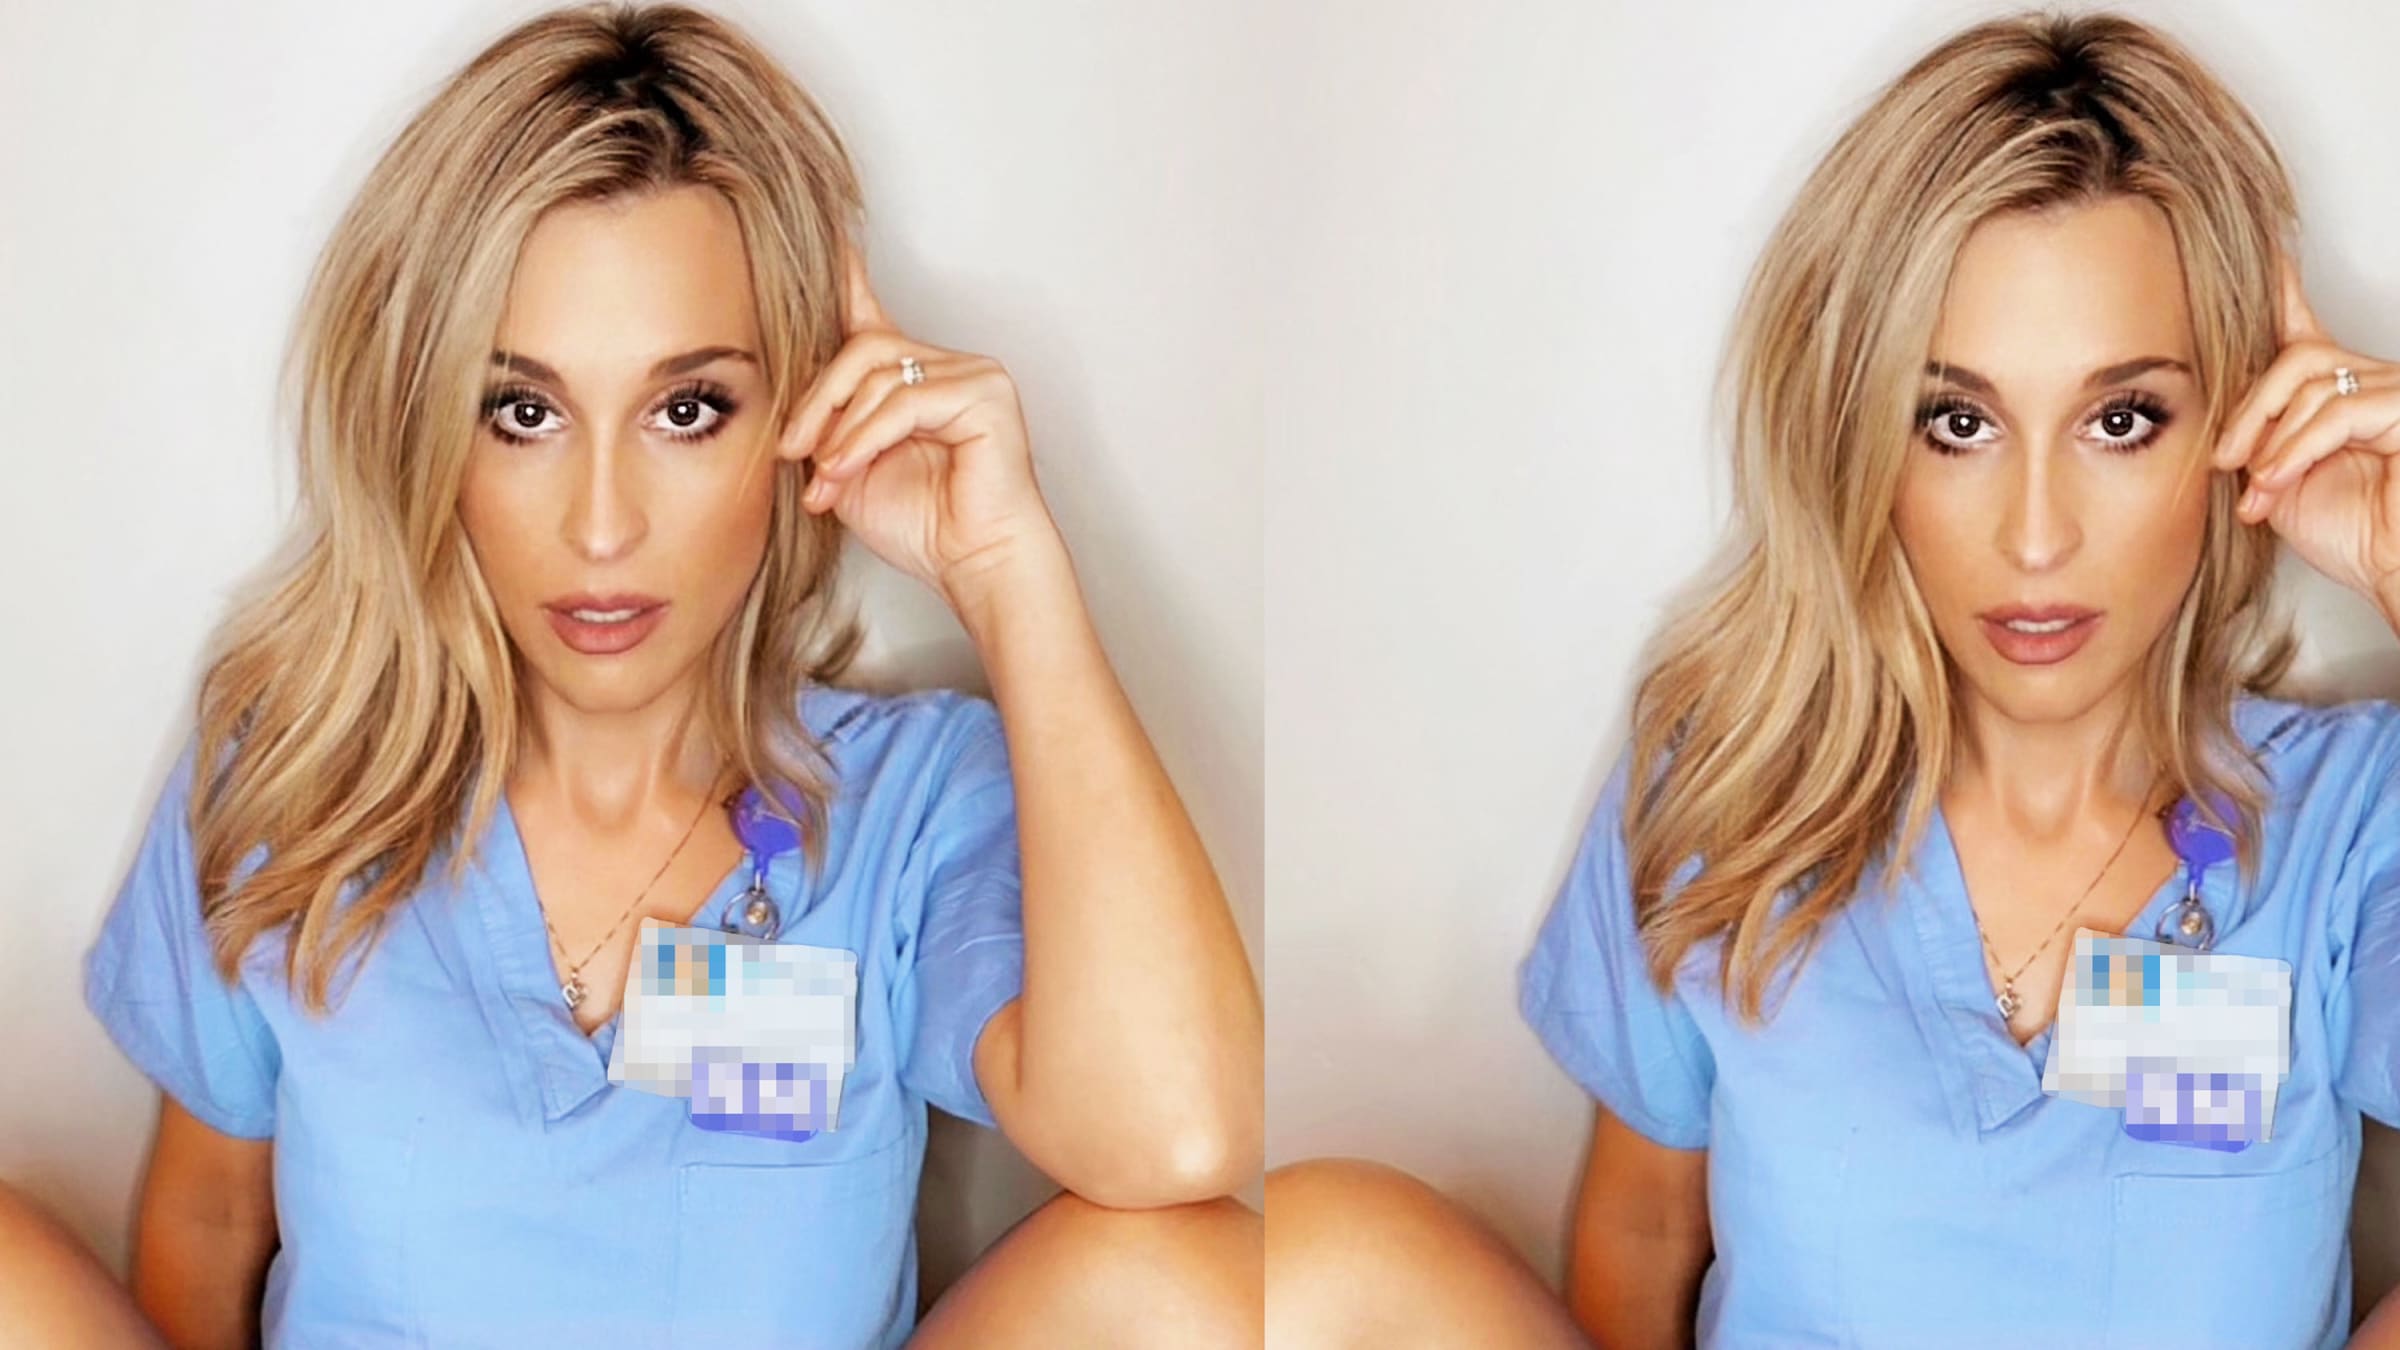 She Quit Being an ICU Nurse to Make Six Figures on OnlyFans